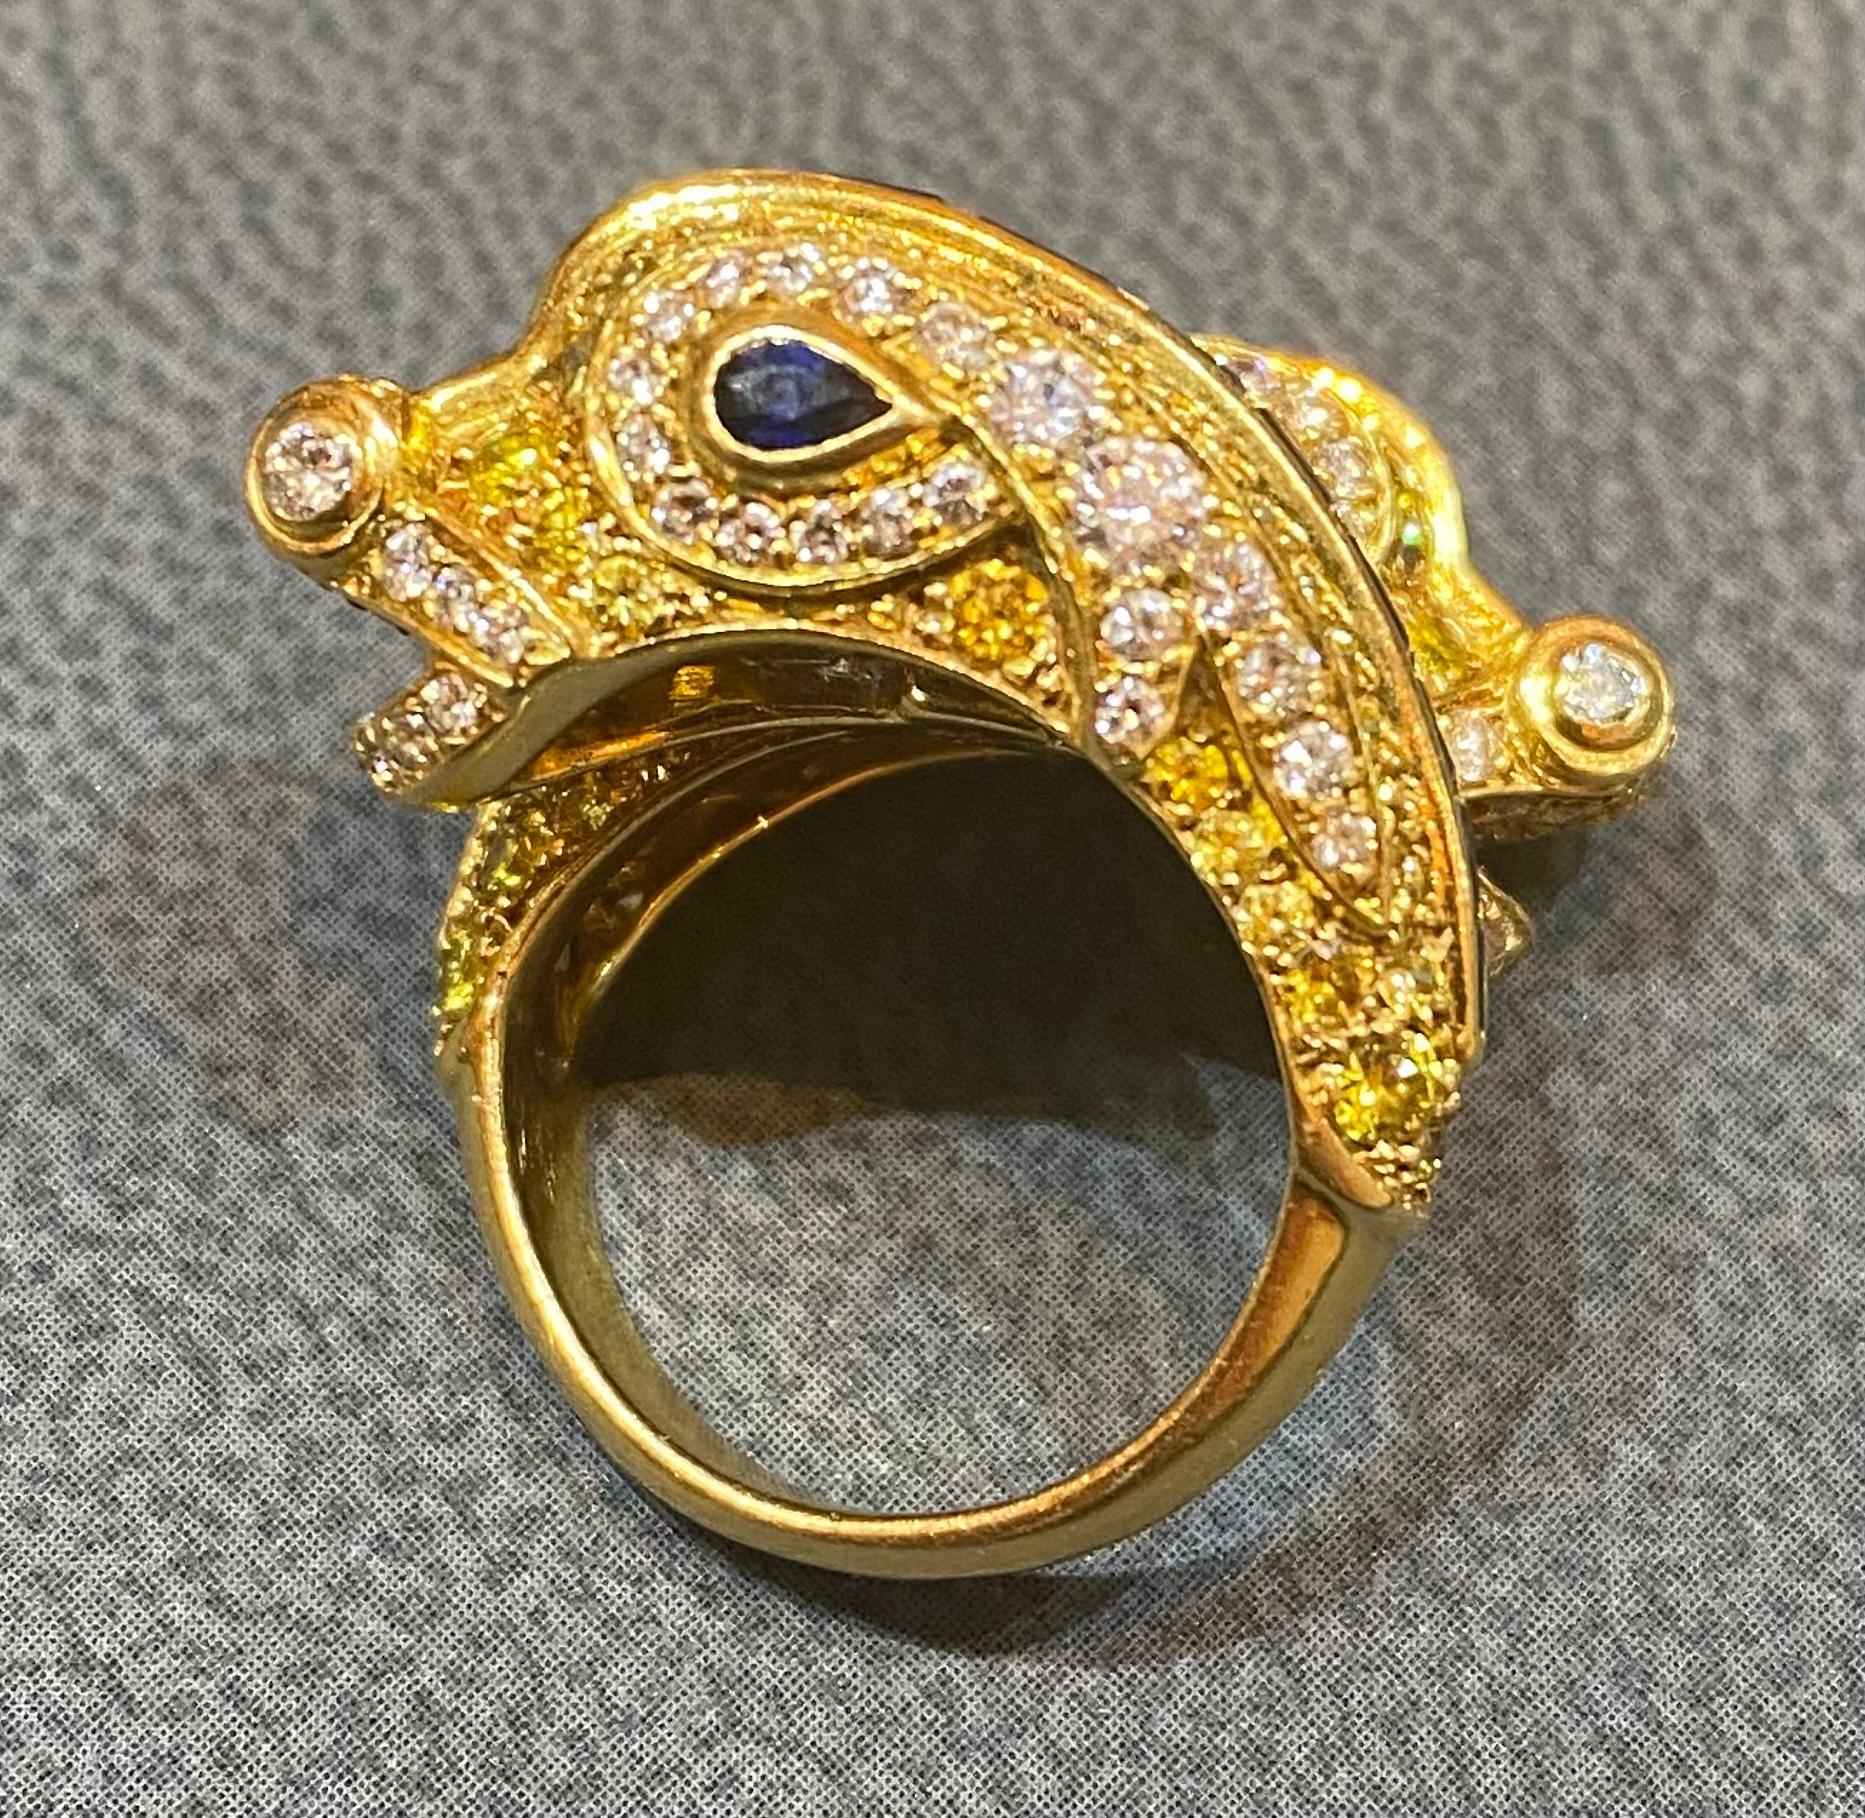 Women's or Men's Extremely Rare and Iconic Fancy Yellow Diamond Chimeres Ring by Cartier